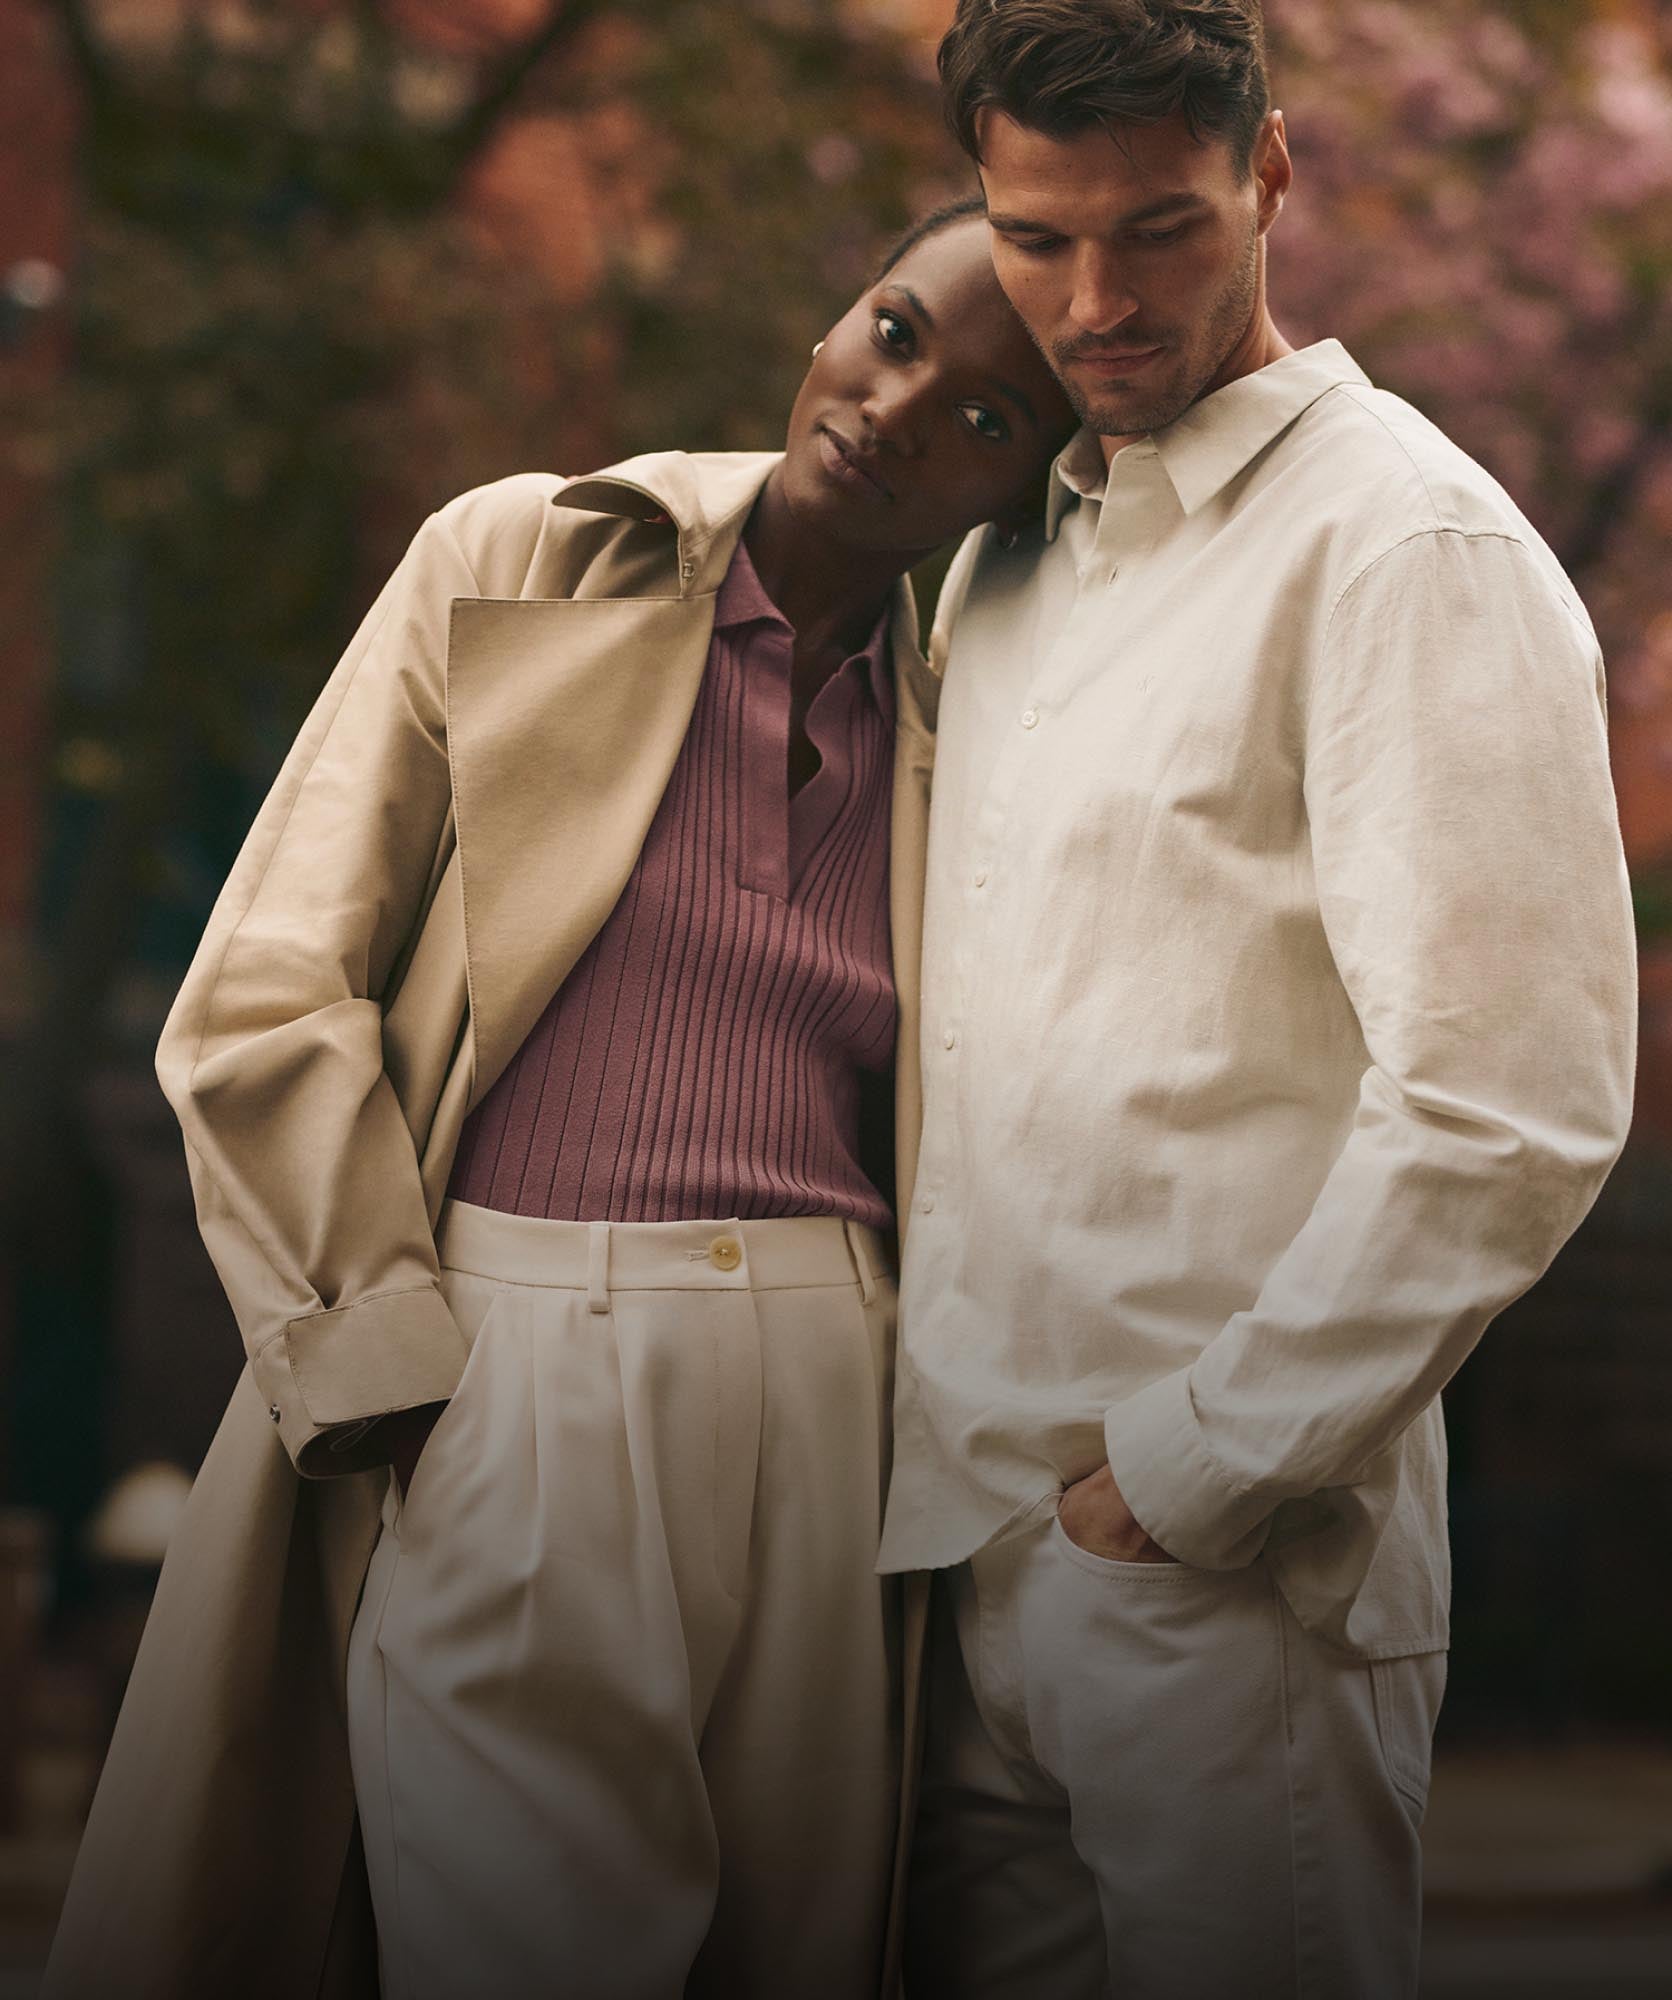 A woman leaning on a man's shoulder, both dressed in Calvin Klein apparel 